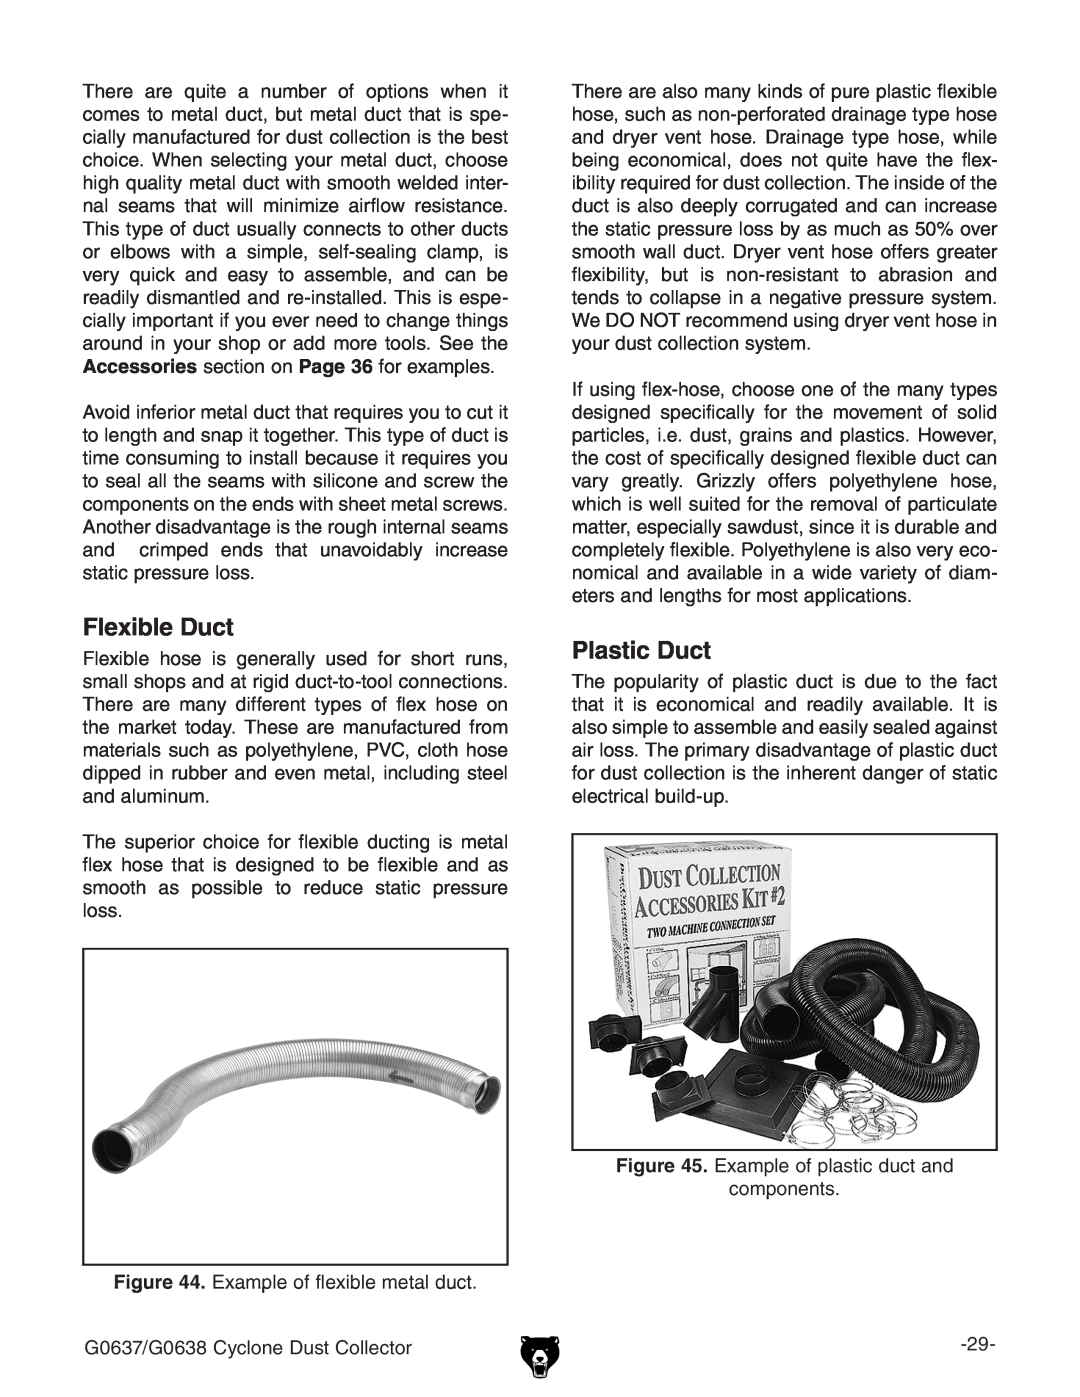 Grizzly G0638, G0637 owner manual Flexible Duct, Plastic Duct 